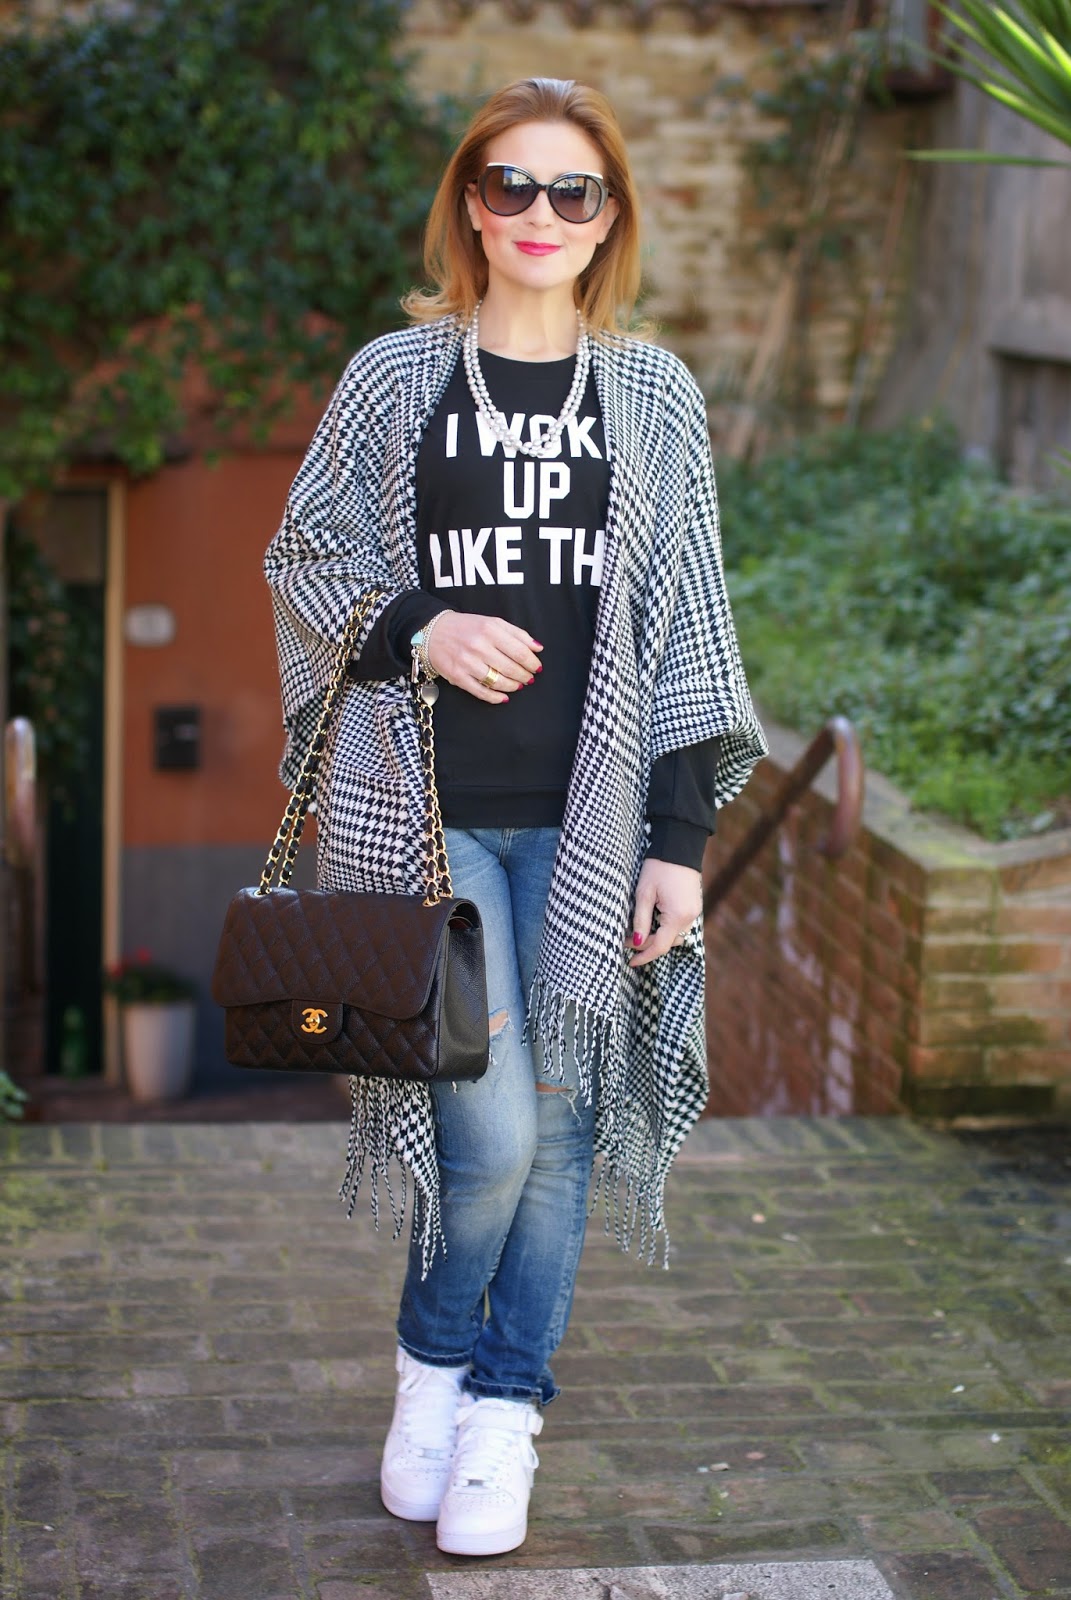 I woke up like this, Romwe t-shirt, silver pearls necklace, Chanel 2,55 bag on Fashion and Cookies fashion blog